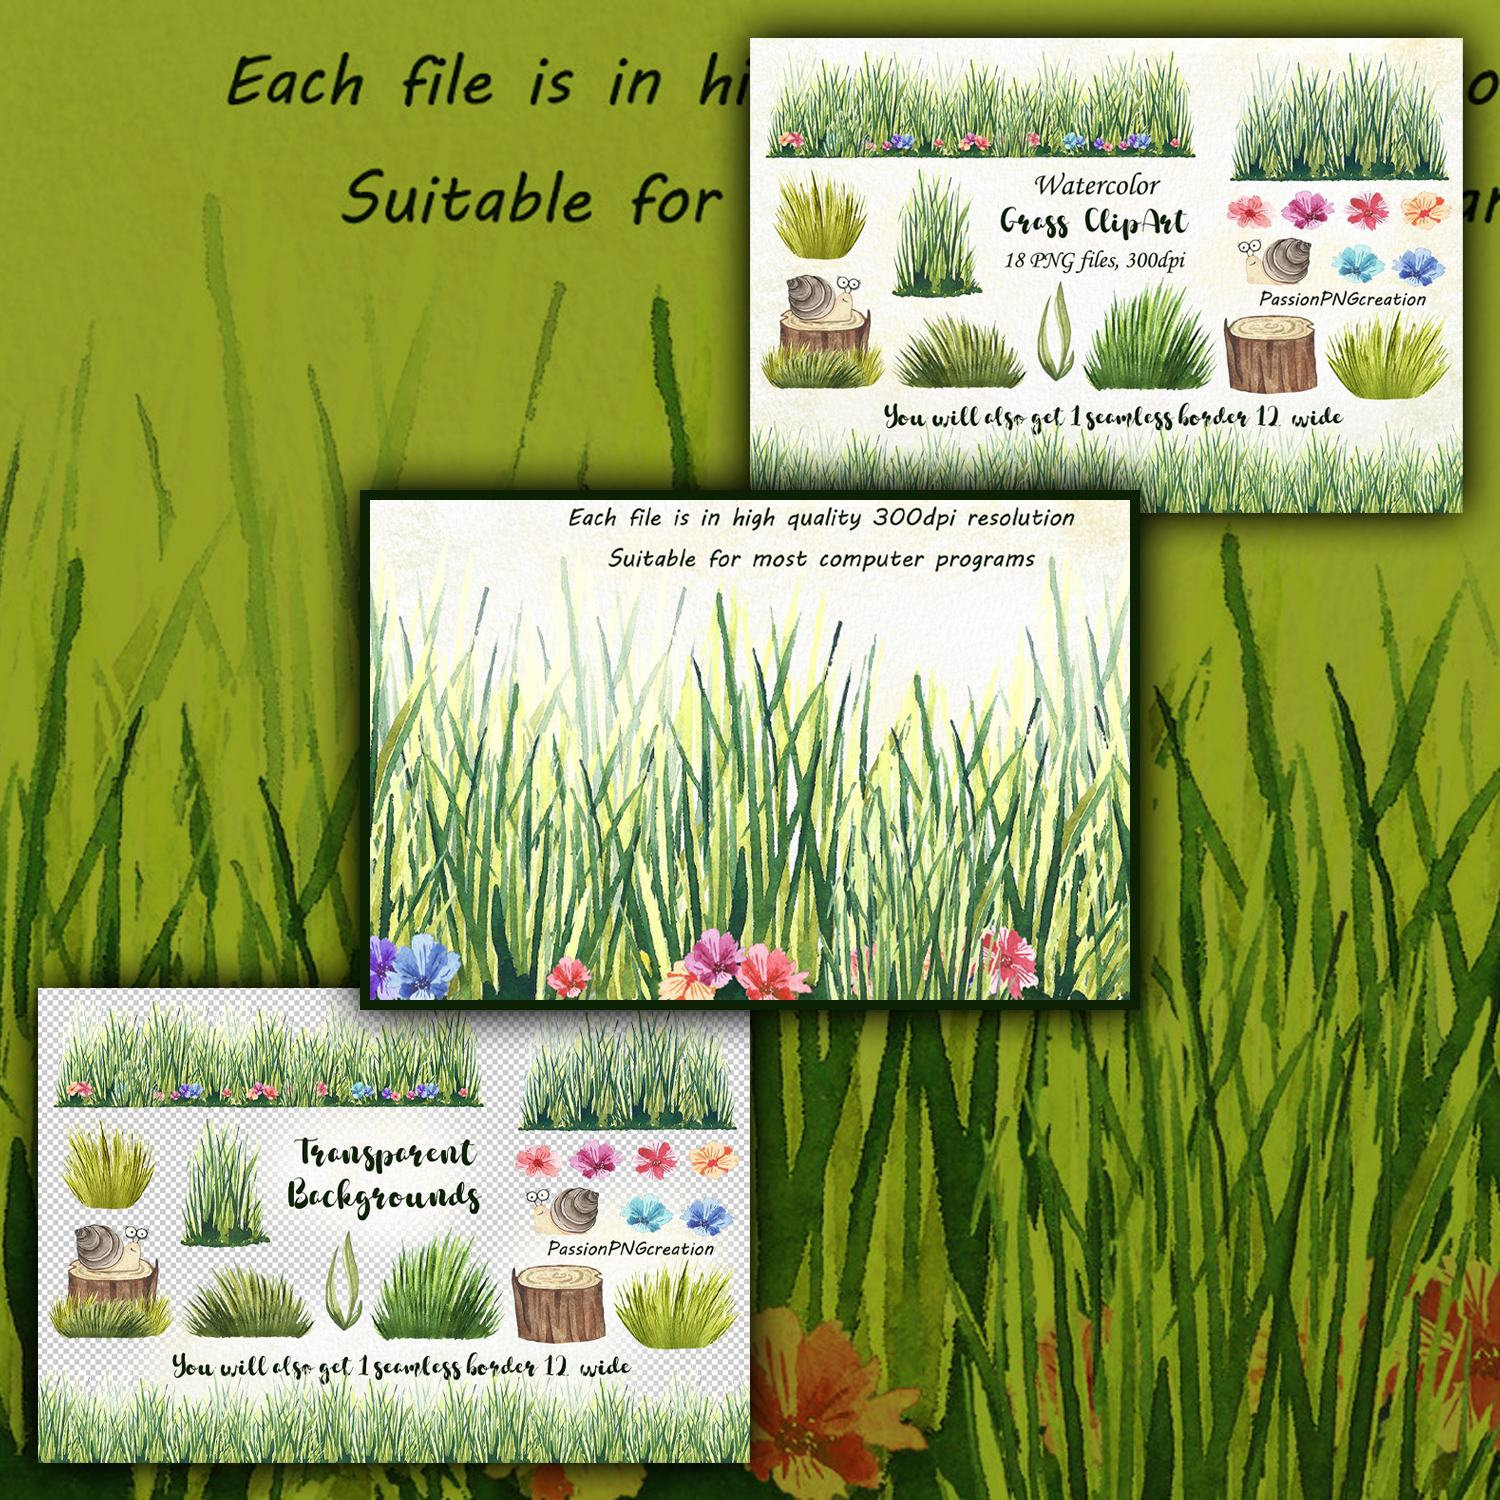 Preview watercolor grass clipart.